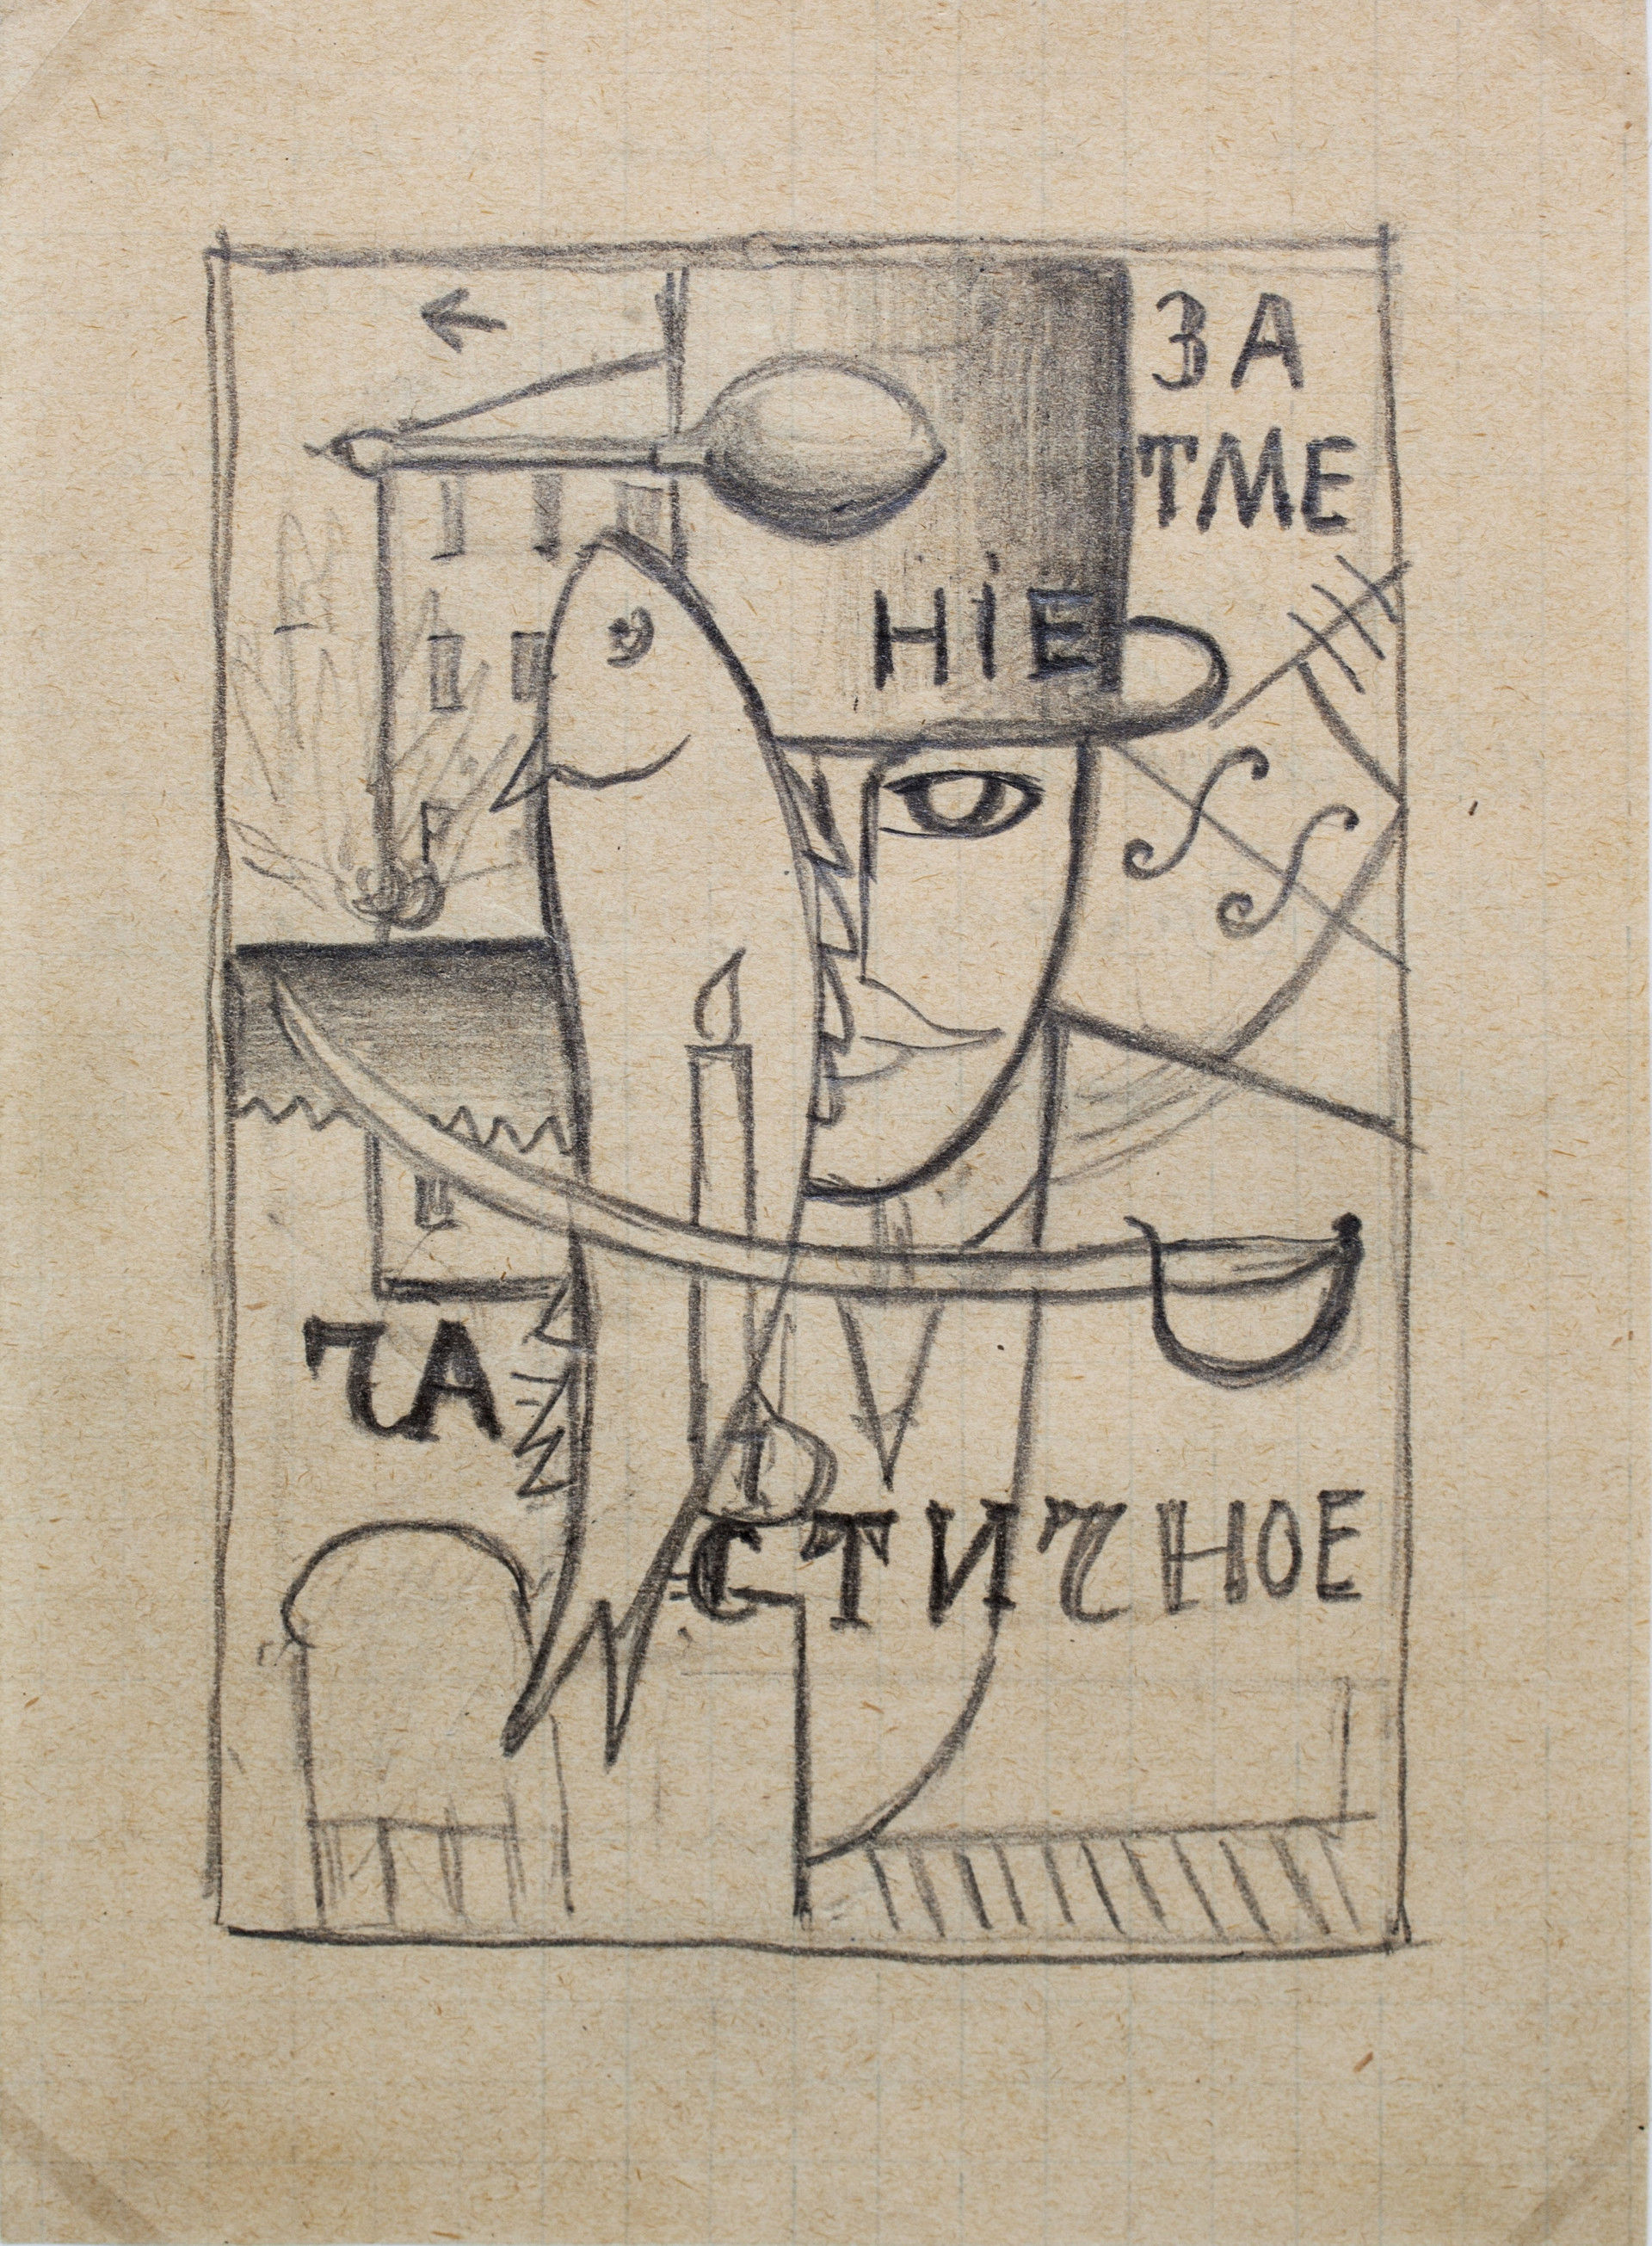 Kazimir Malevich, study for An Englishman in Moscow, 1914, pencil on paper, 14 x 10 cm